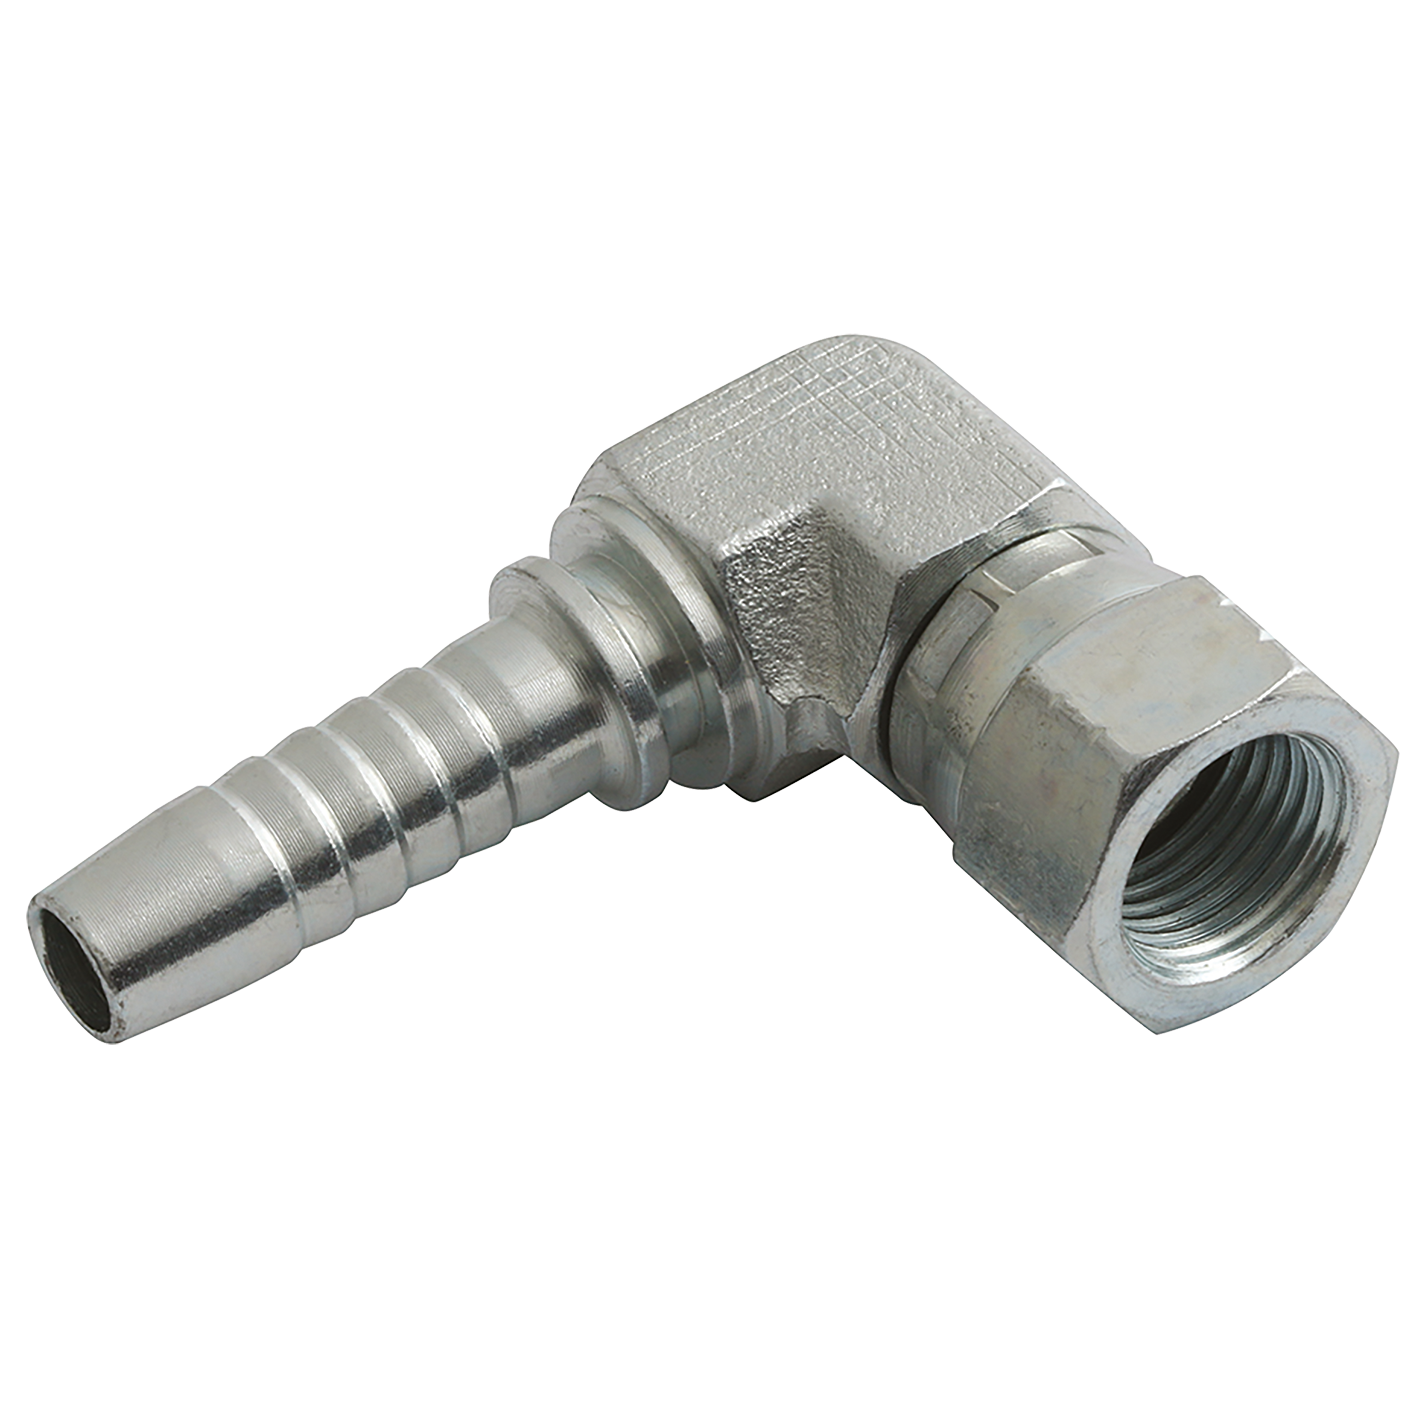 7/16" JIC Female Hose Connector 90° Compact Elbow